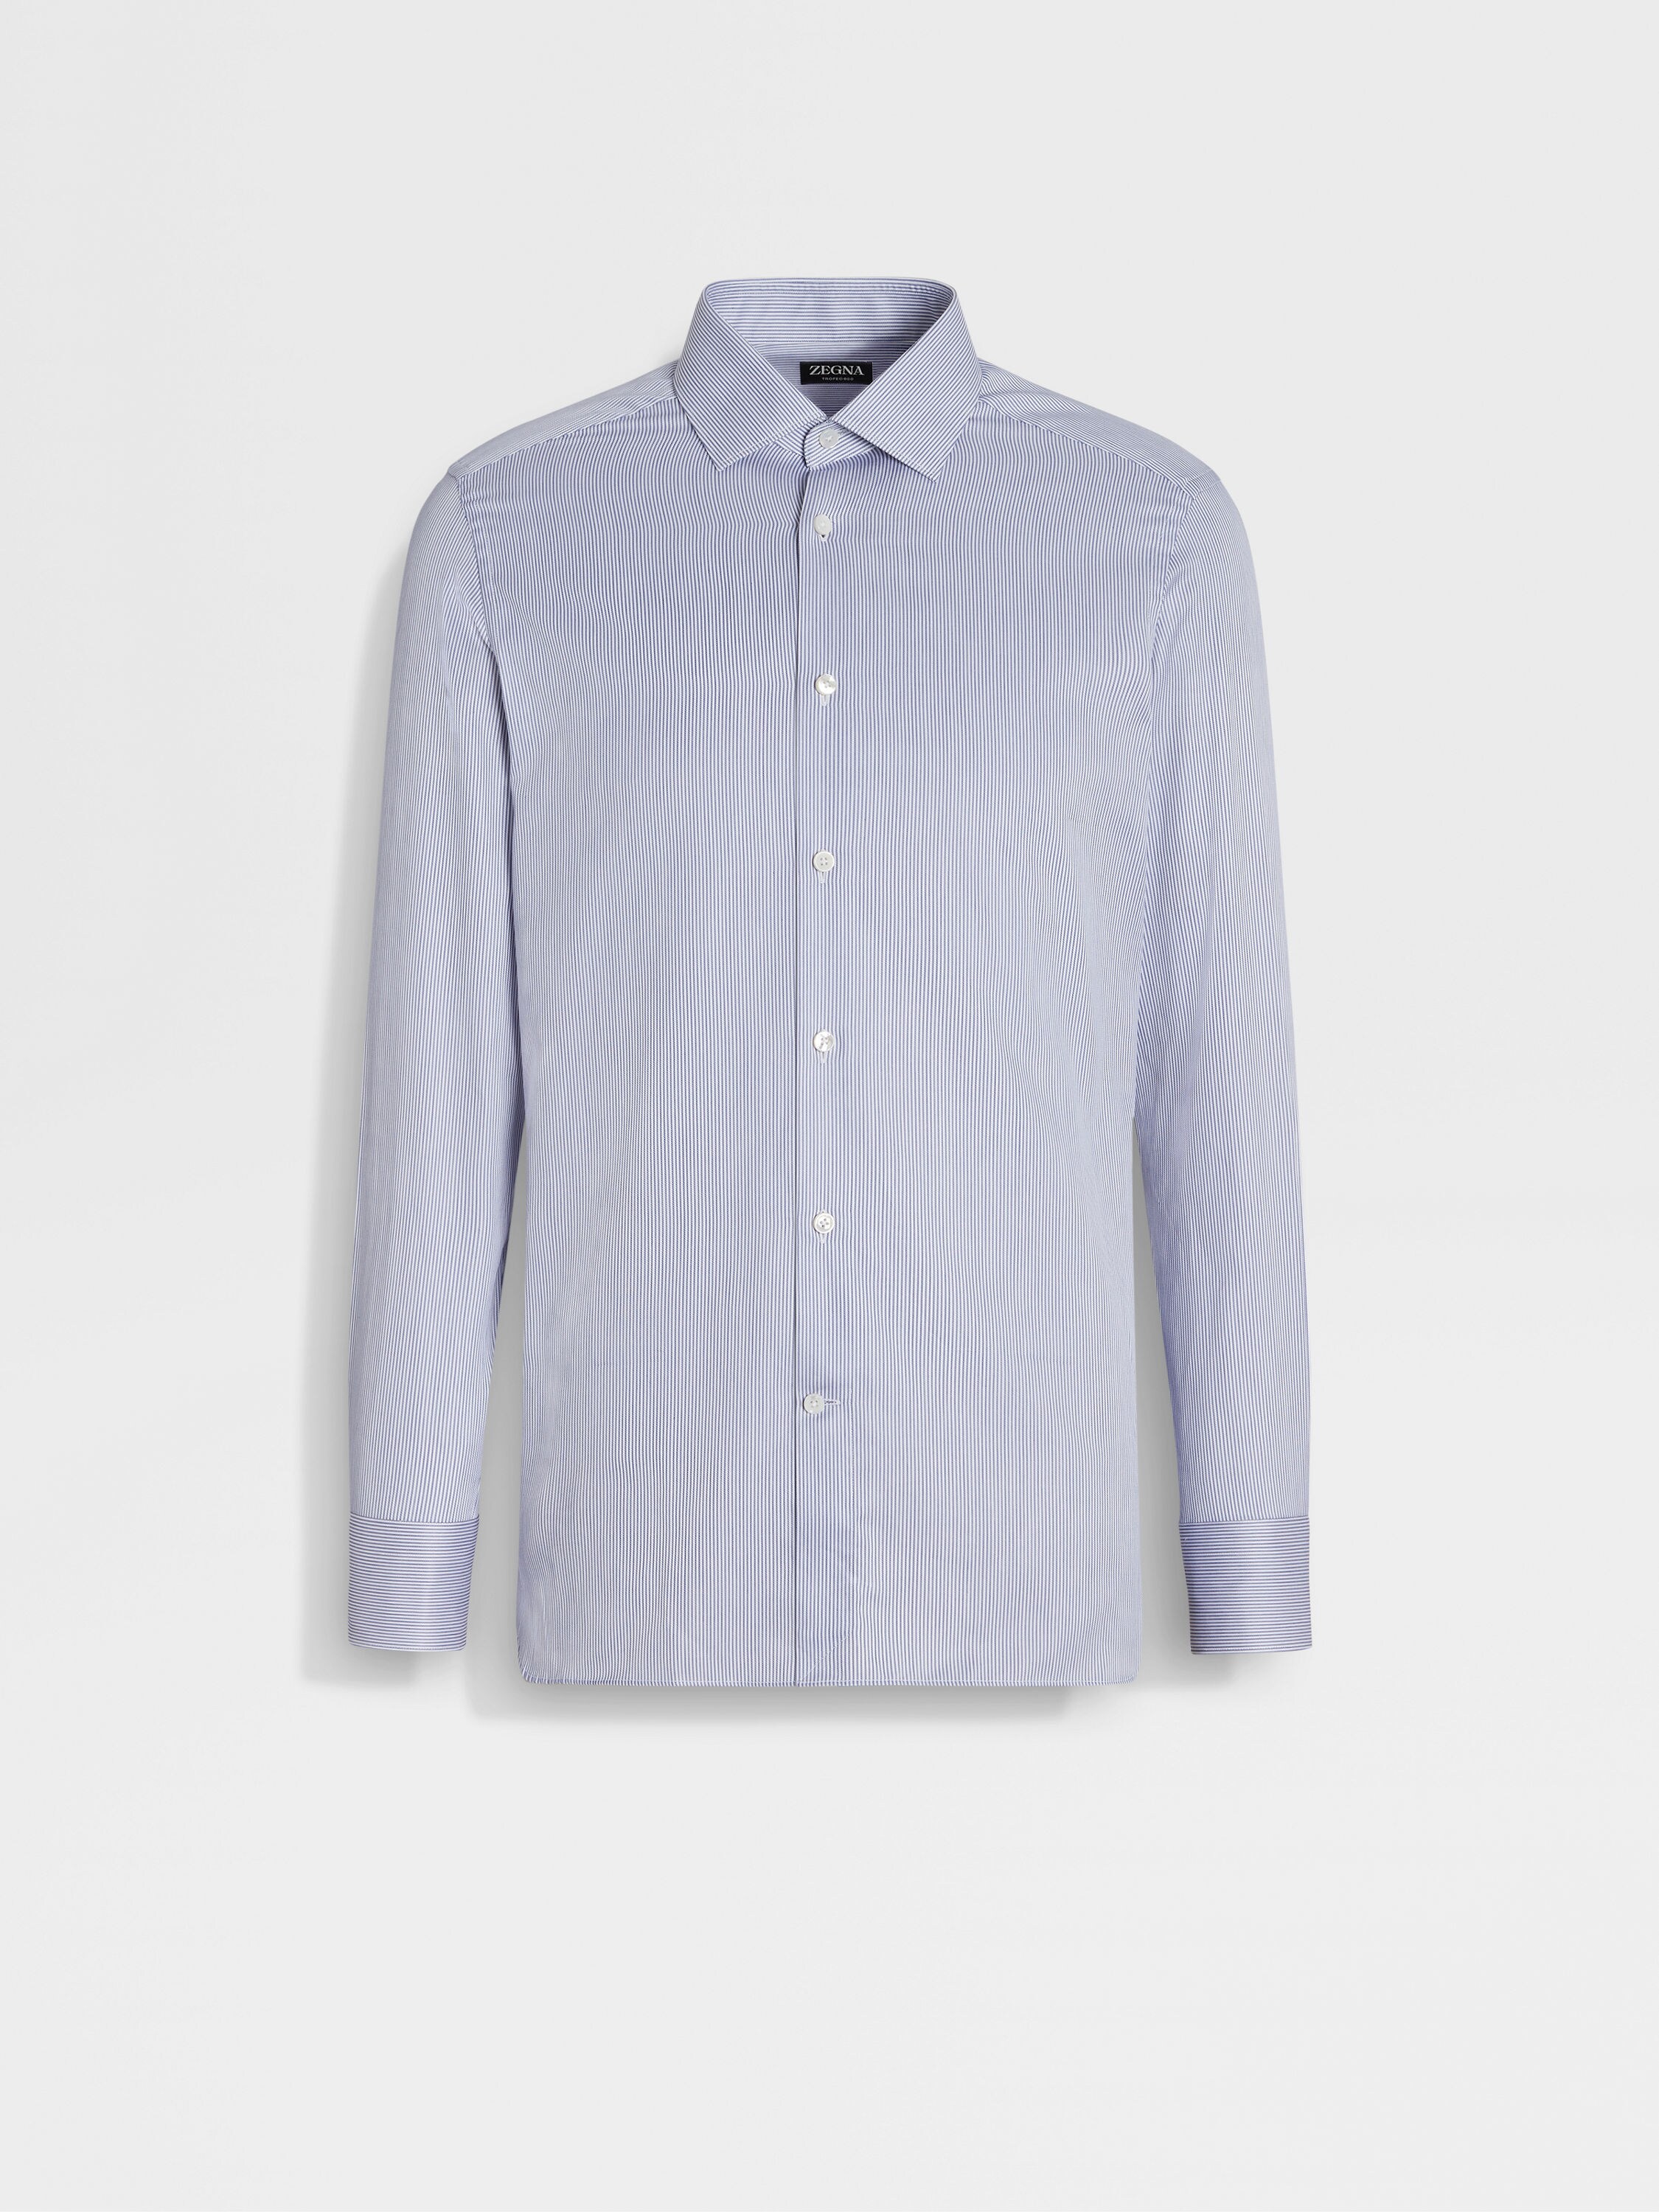 Utility Blue and White Micro-striped Trofeo™ 600 Cotton and Silk Shirt